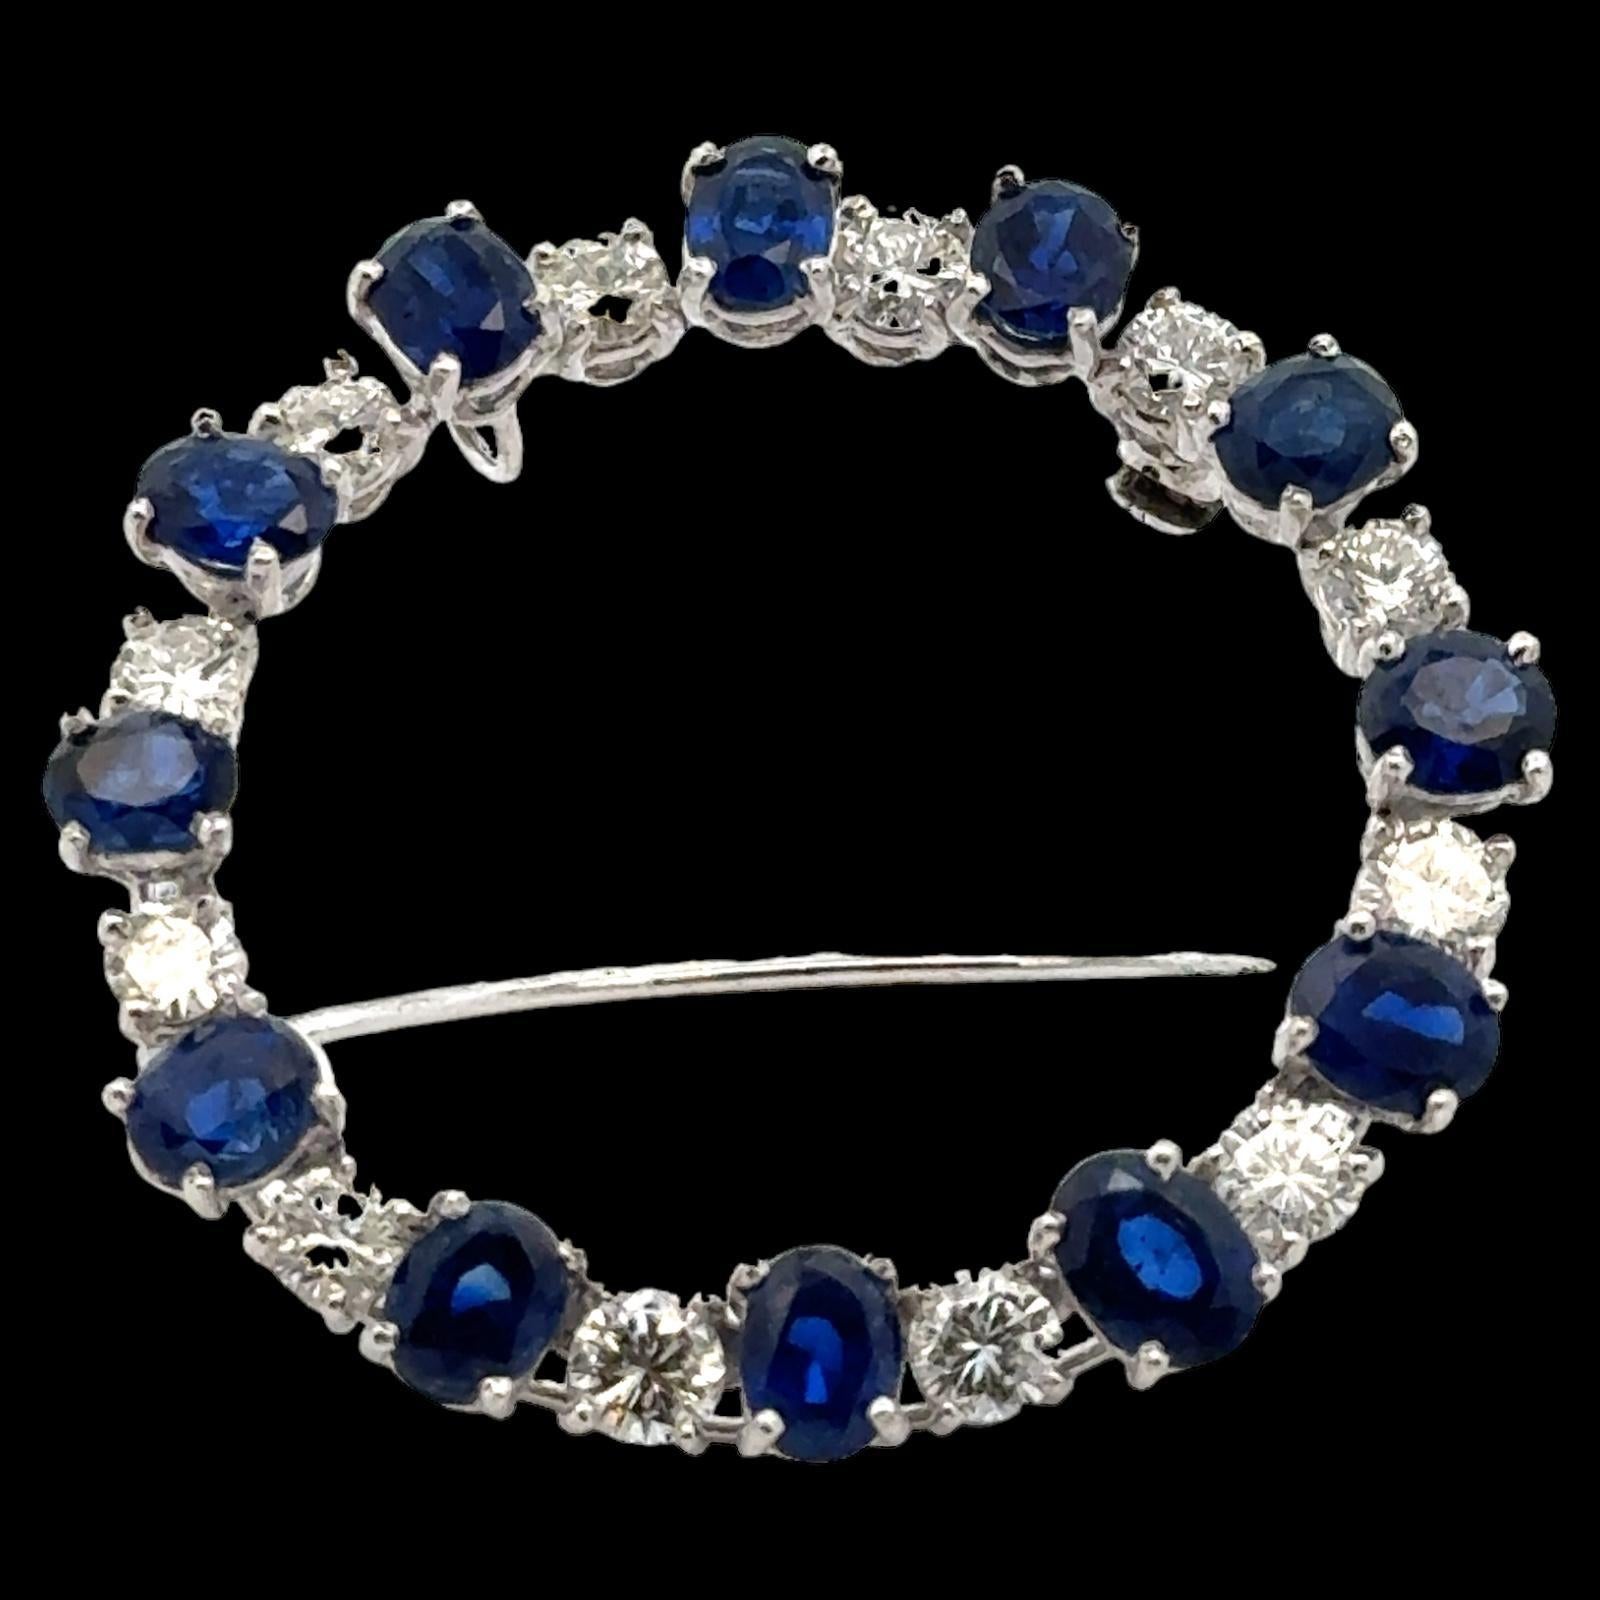 1960's diamond and sapphire brooch handcrafted in platinum. The pin features 12 round brilliant cut diamonds weighing approximately 3.00 carat total weight and graded G-H color and VS2-SI1 clarity. The diamonds alternate with 12 oval sapphires